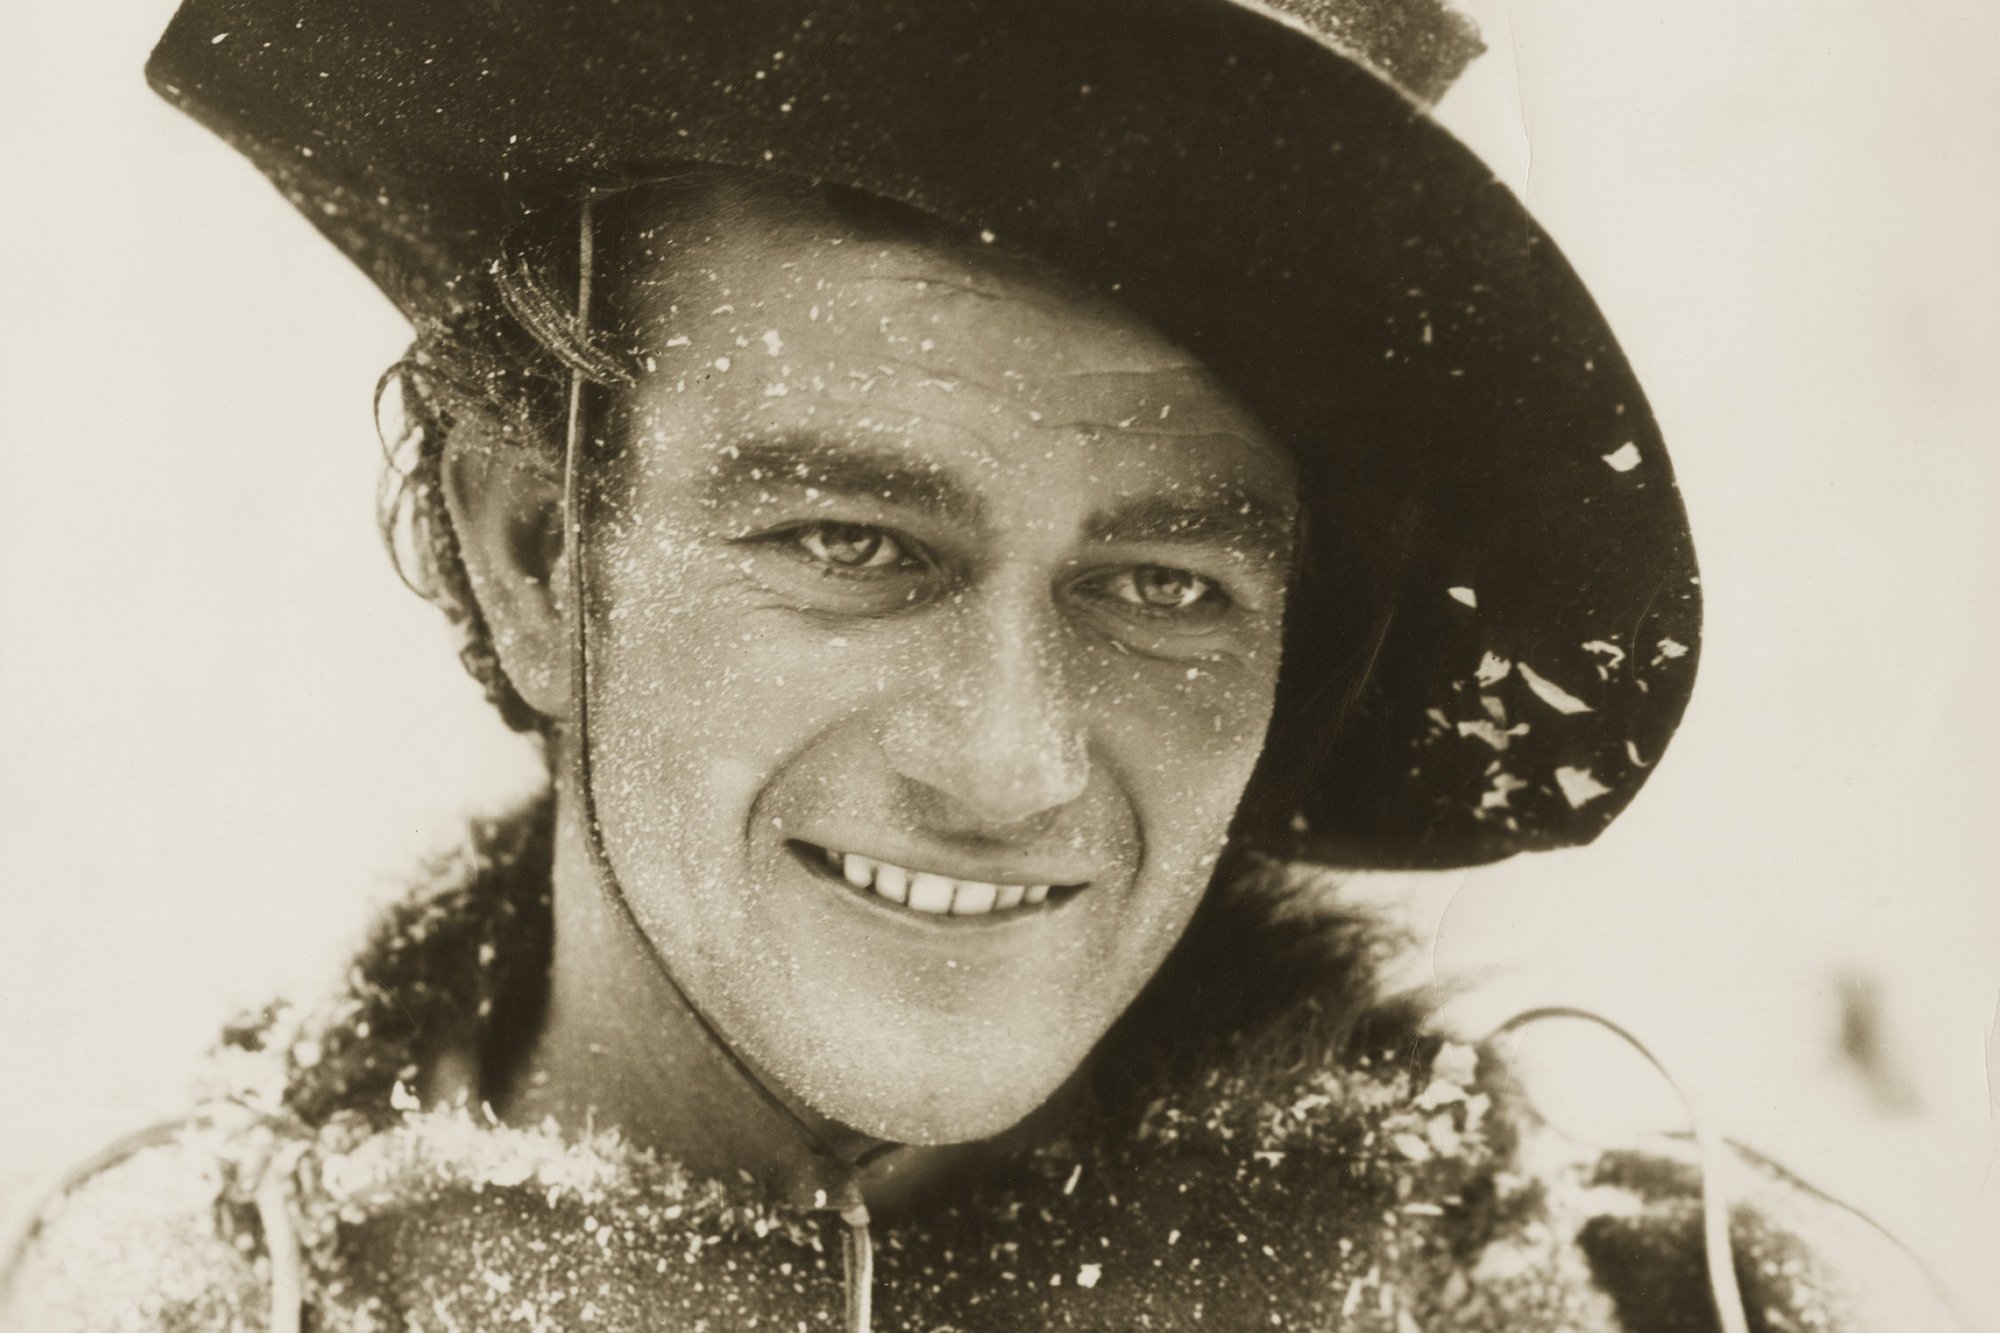 'The Big Trail' movie star John Wayne. He's wearing a cowboy hat and Western costume. Wayne has a smile on his face in a sepia tone picture.